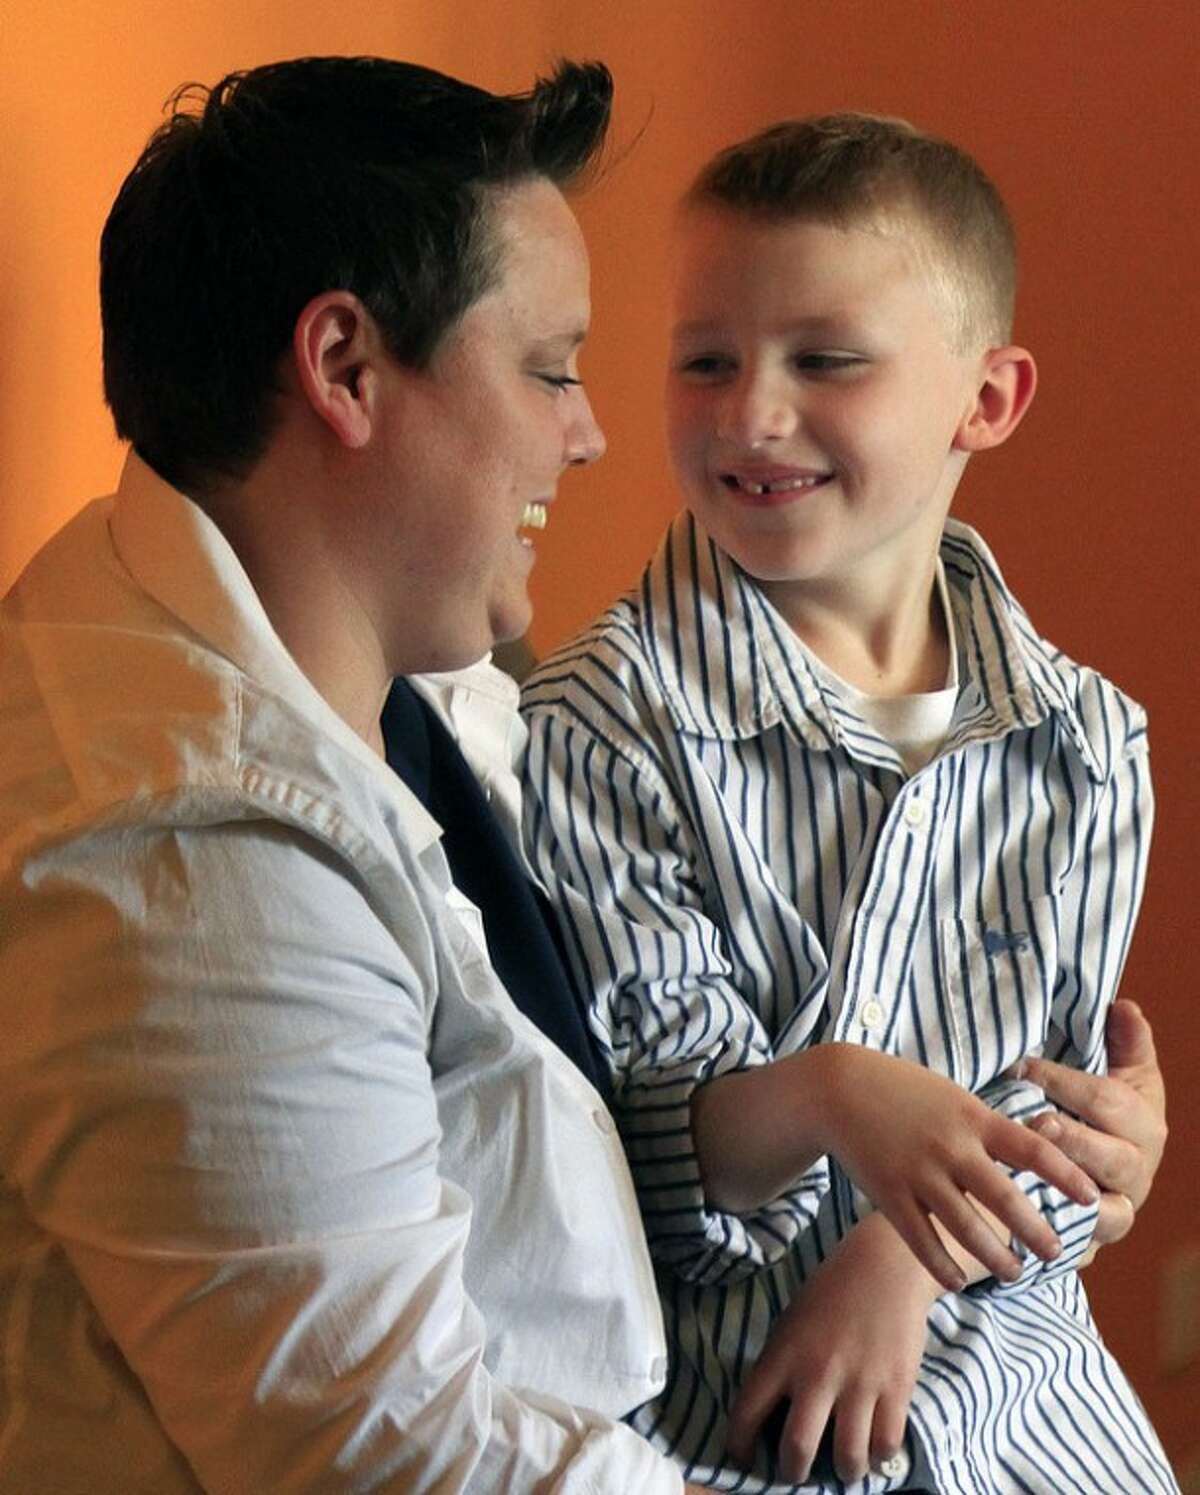 FILE - This Wednesday, April 25, 2012 photo shows Jennifer Tyrrell and her son Cruz Burns, 7, during a visit to New York. After a confidential two-year review, the Boy Scouts of America on Tuesday, July 17, 2012 emphatically reaffirmed its policy of excluding gays. Since 2000, the Boy Scouts have been targeted with numerous protest campaigns and run afoul of some local nondiscrimination laws because of the membership policy. One ongoing protest campaign involves Tyrrell, the Ohio mother of the 7-year-old Cub Scout who was ousted as a Scout den mother because she is lesbian. (AP Photo/Bebeto Matthews)